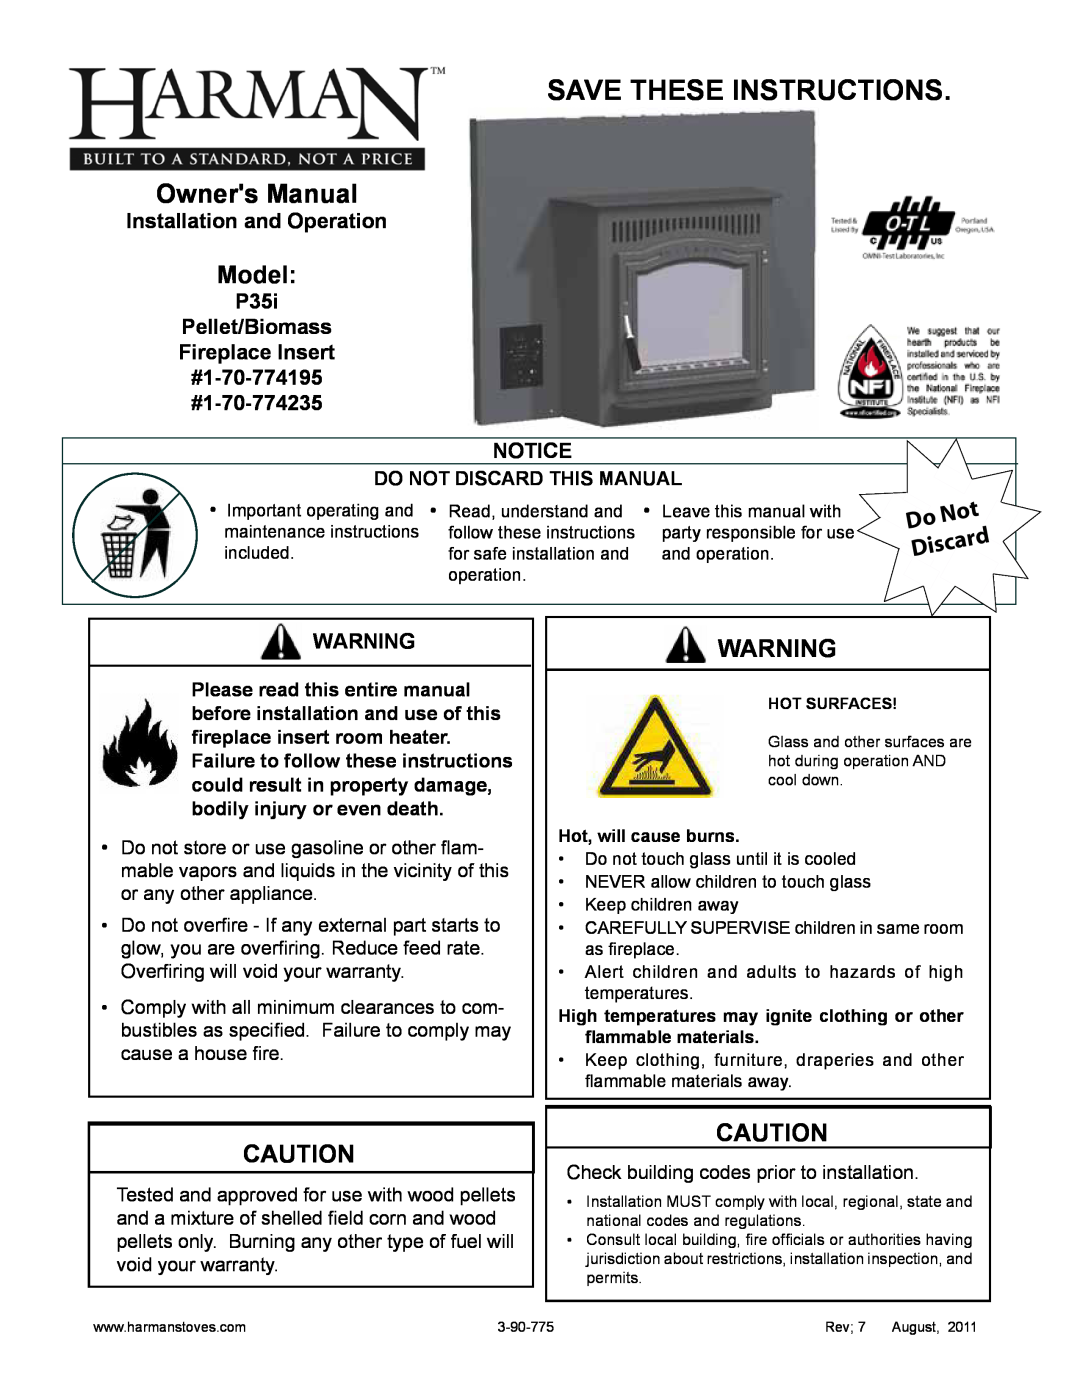 Harman Stove Company P35I owner manual Save These Instructions, Model, Discard 